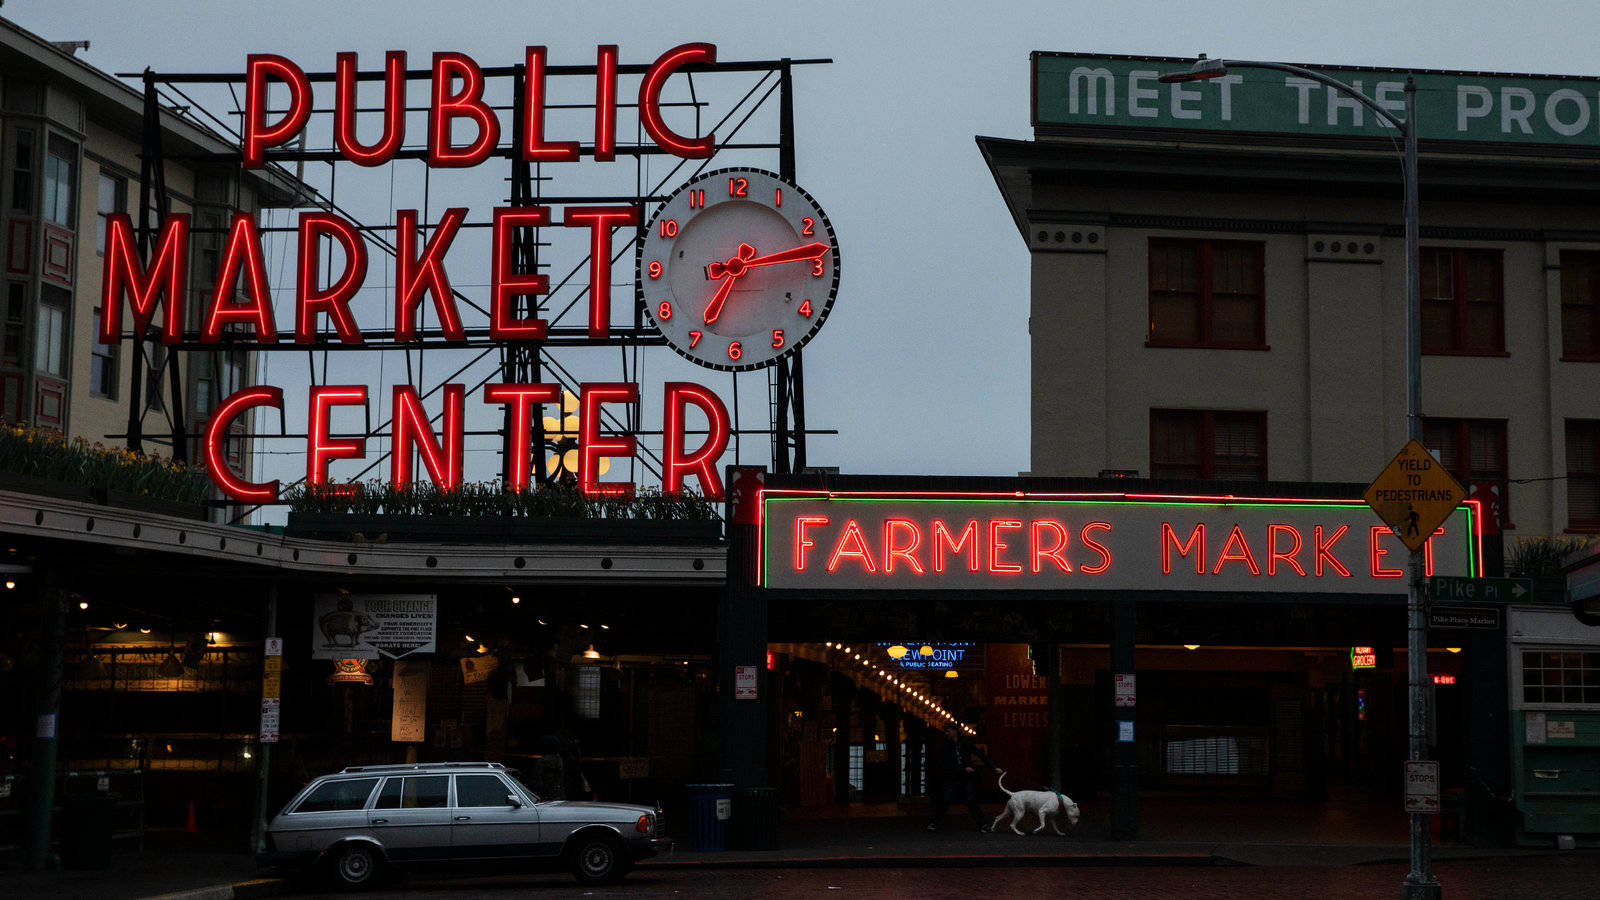 Pikeplace Market Rote Led-schilder Wallpaper